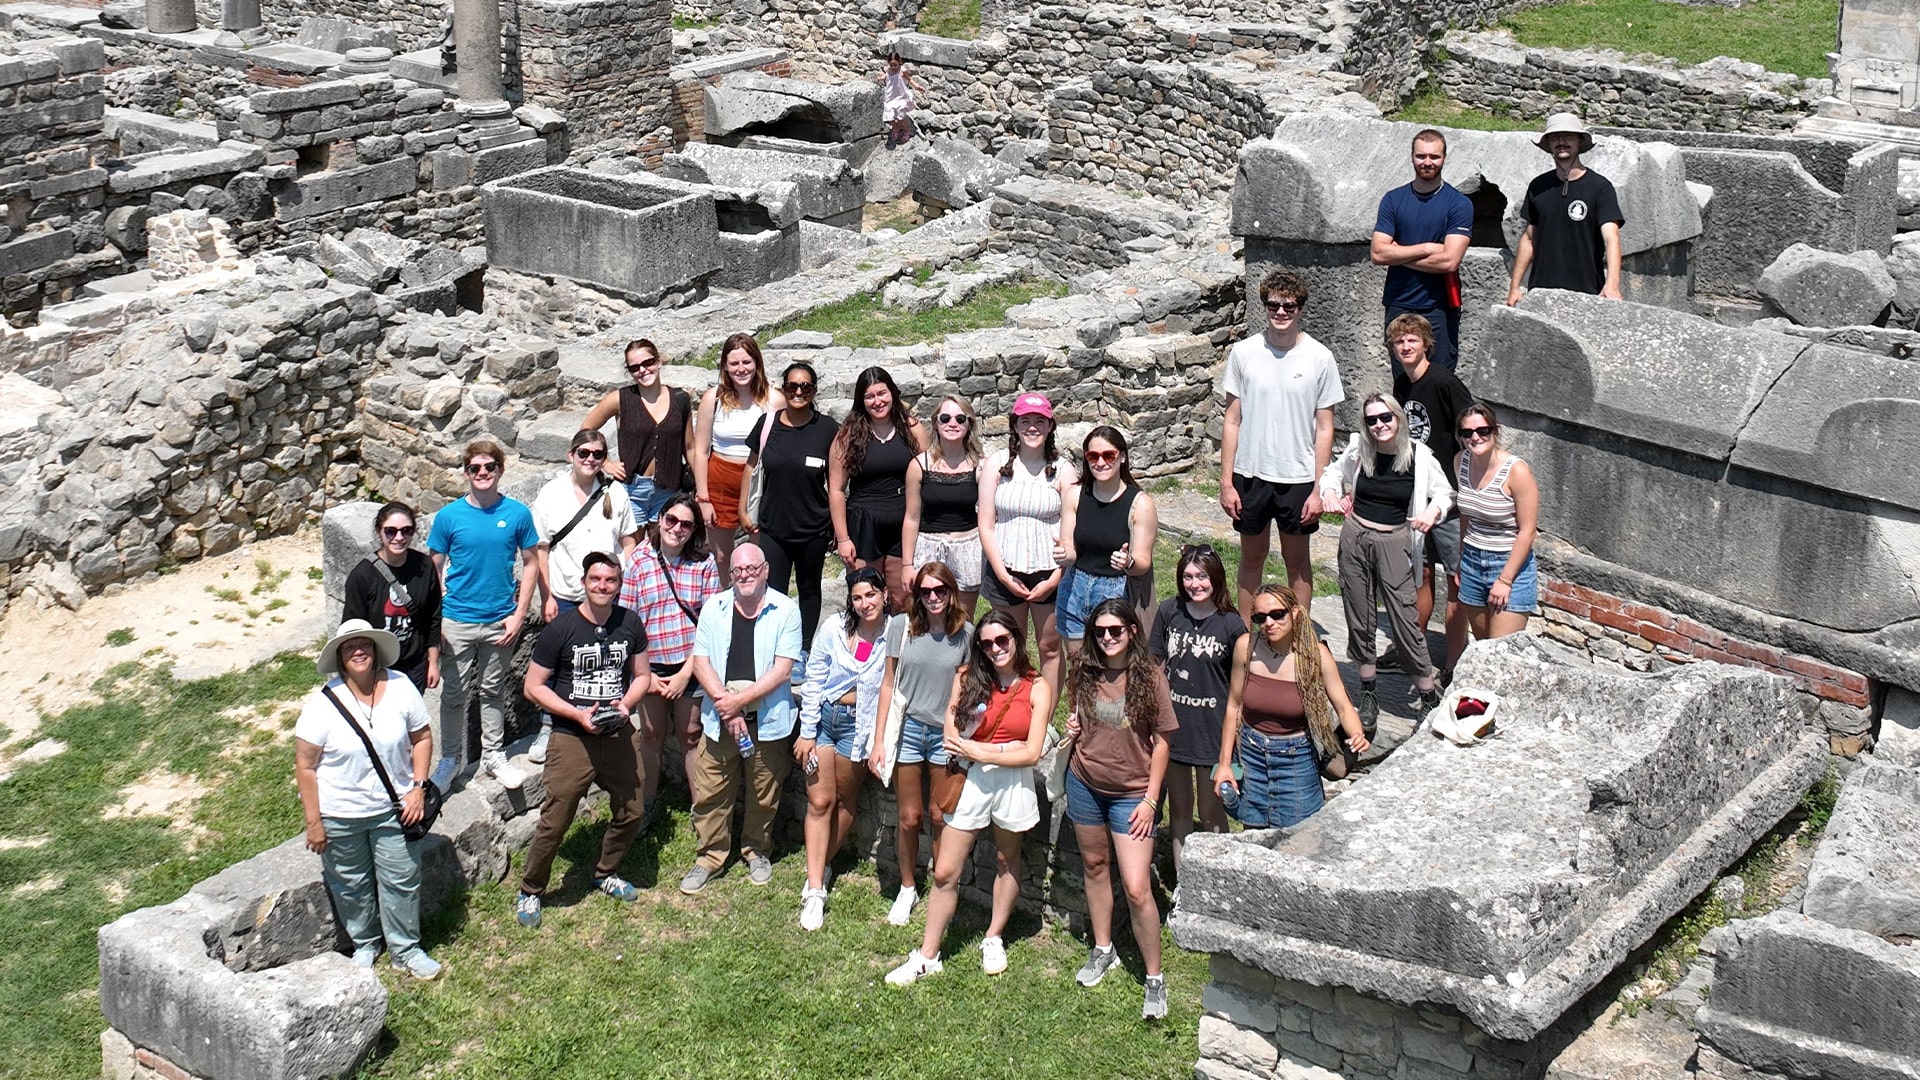 Croatia Maymester Creates New Experiences for Students